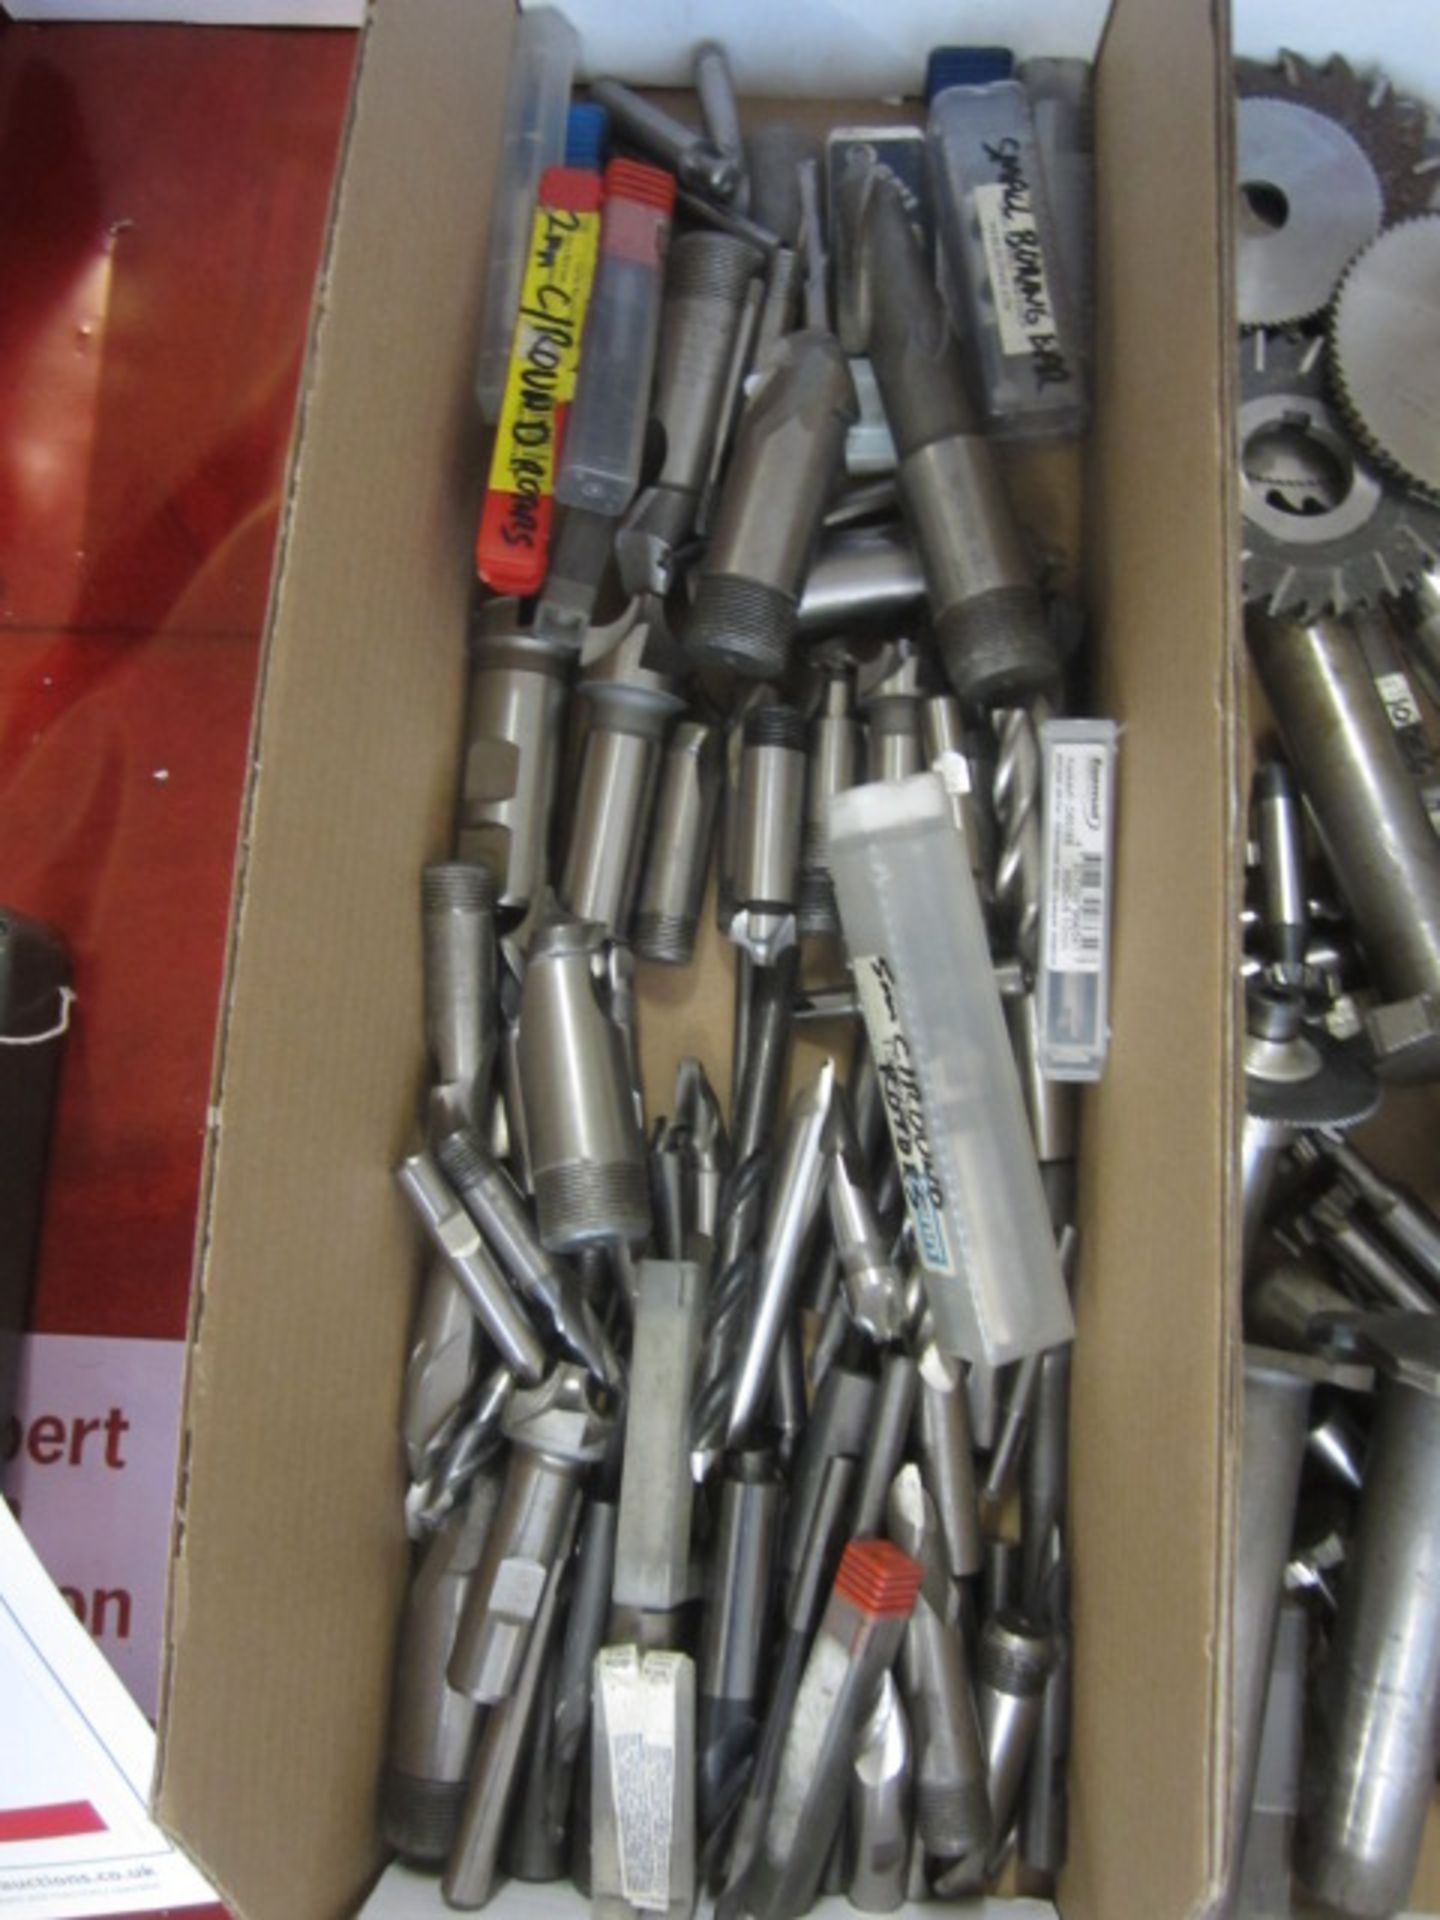 Box of assorted HSS tooling to include drill bits, cutters, borers, end mills, etc.